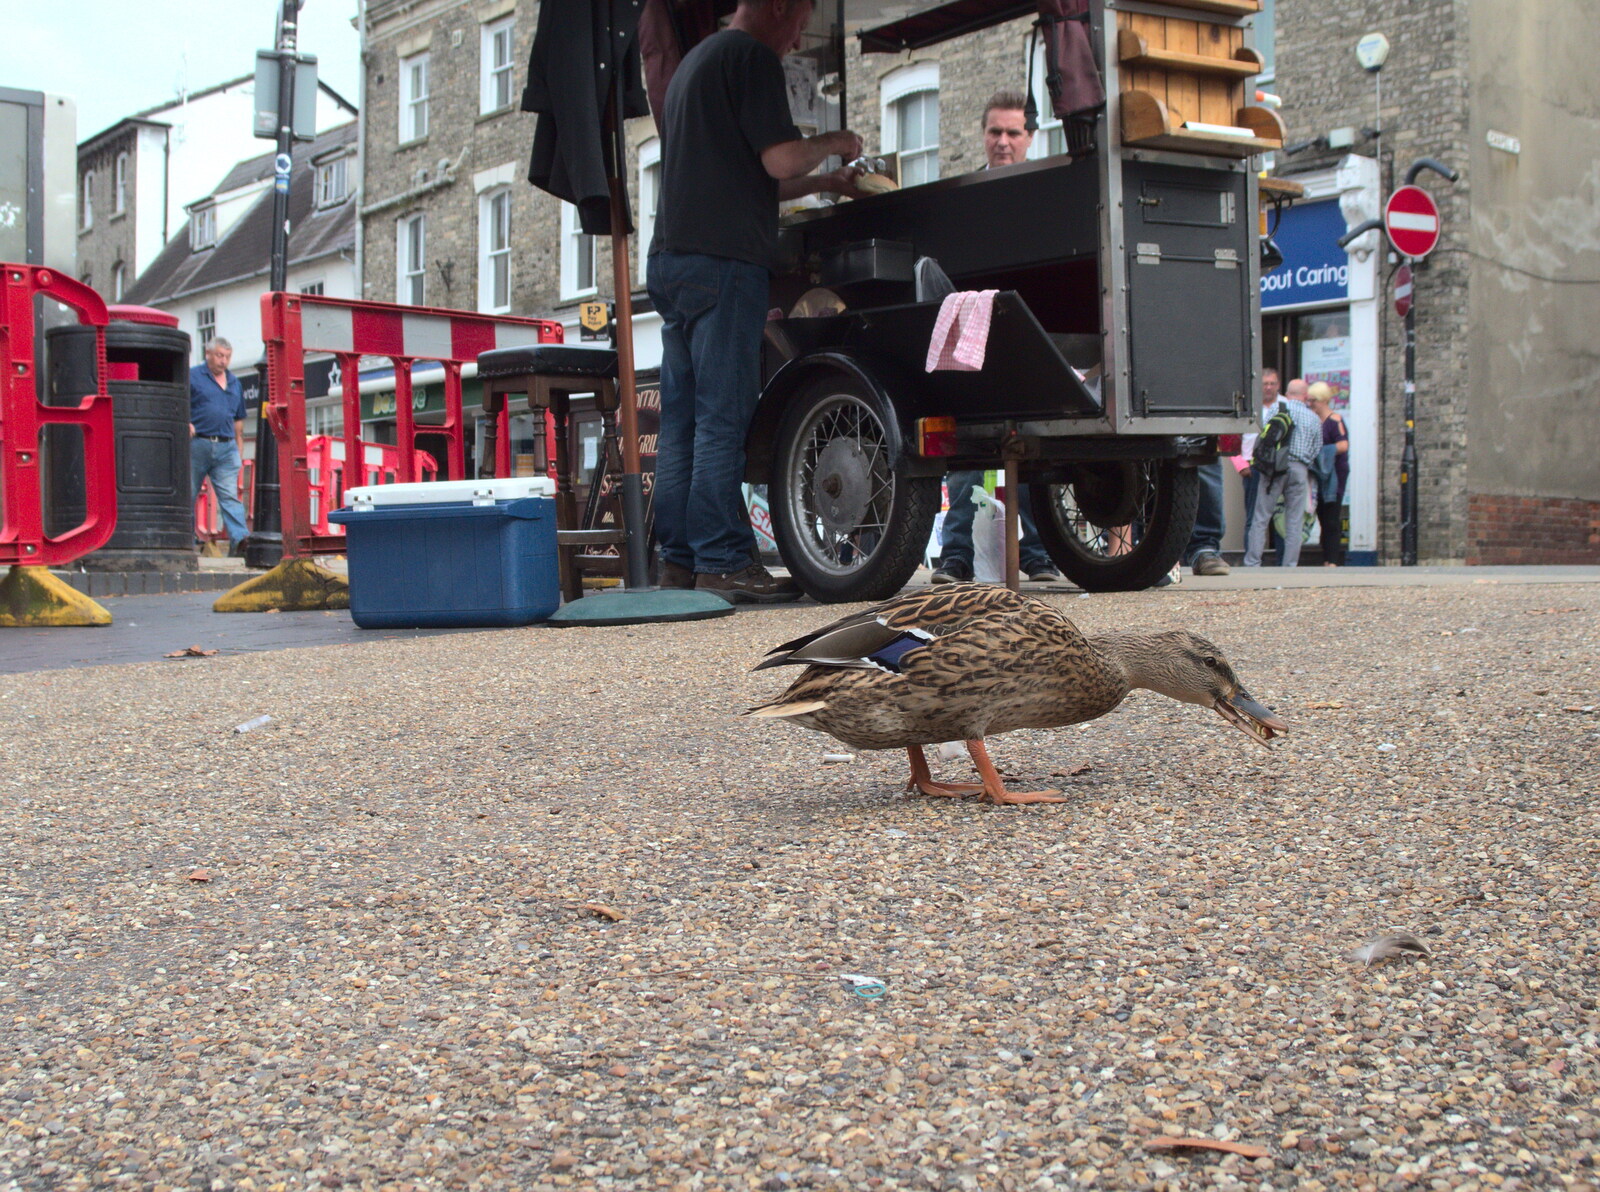 A duck pecks at stuff near Andy Sausage's van from A House Built of Wax and Diss Randomness, Southwark Street, London - 30th September 2014